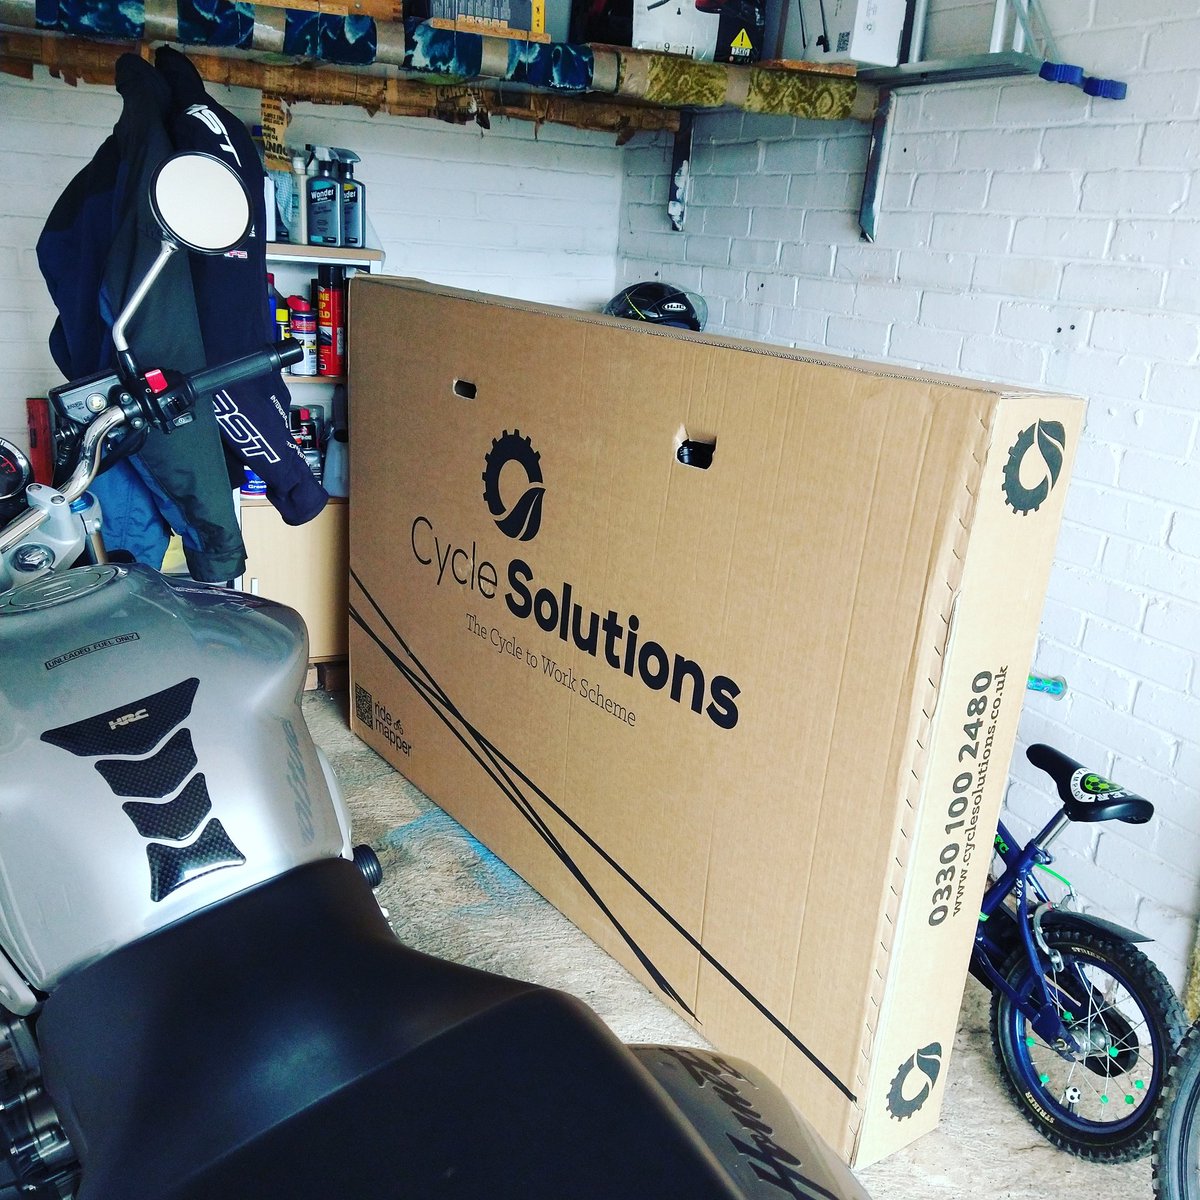 New bike day for me 😊🚴‍♂️ #cycletoworkscheme #cyclesolutions #excited